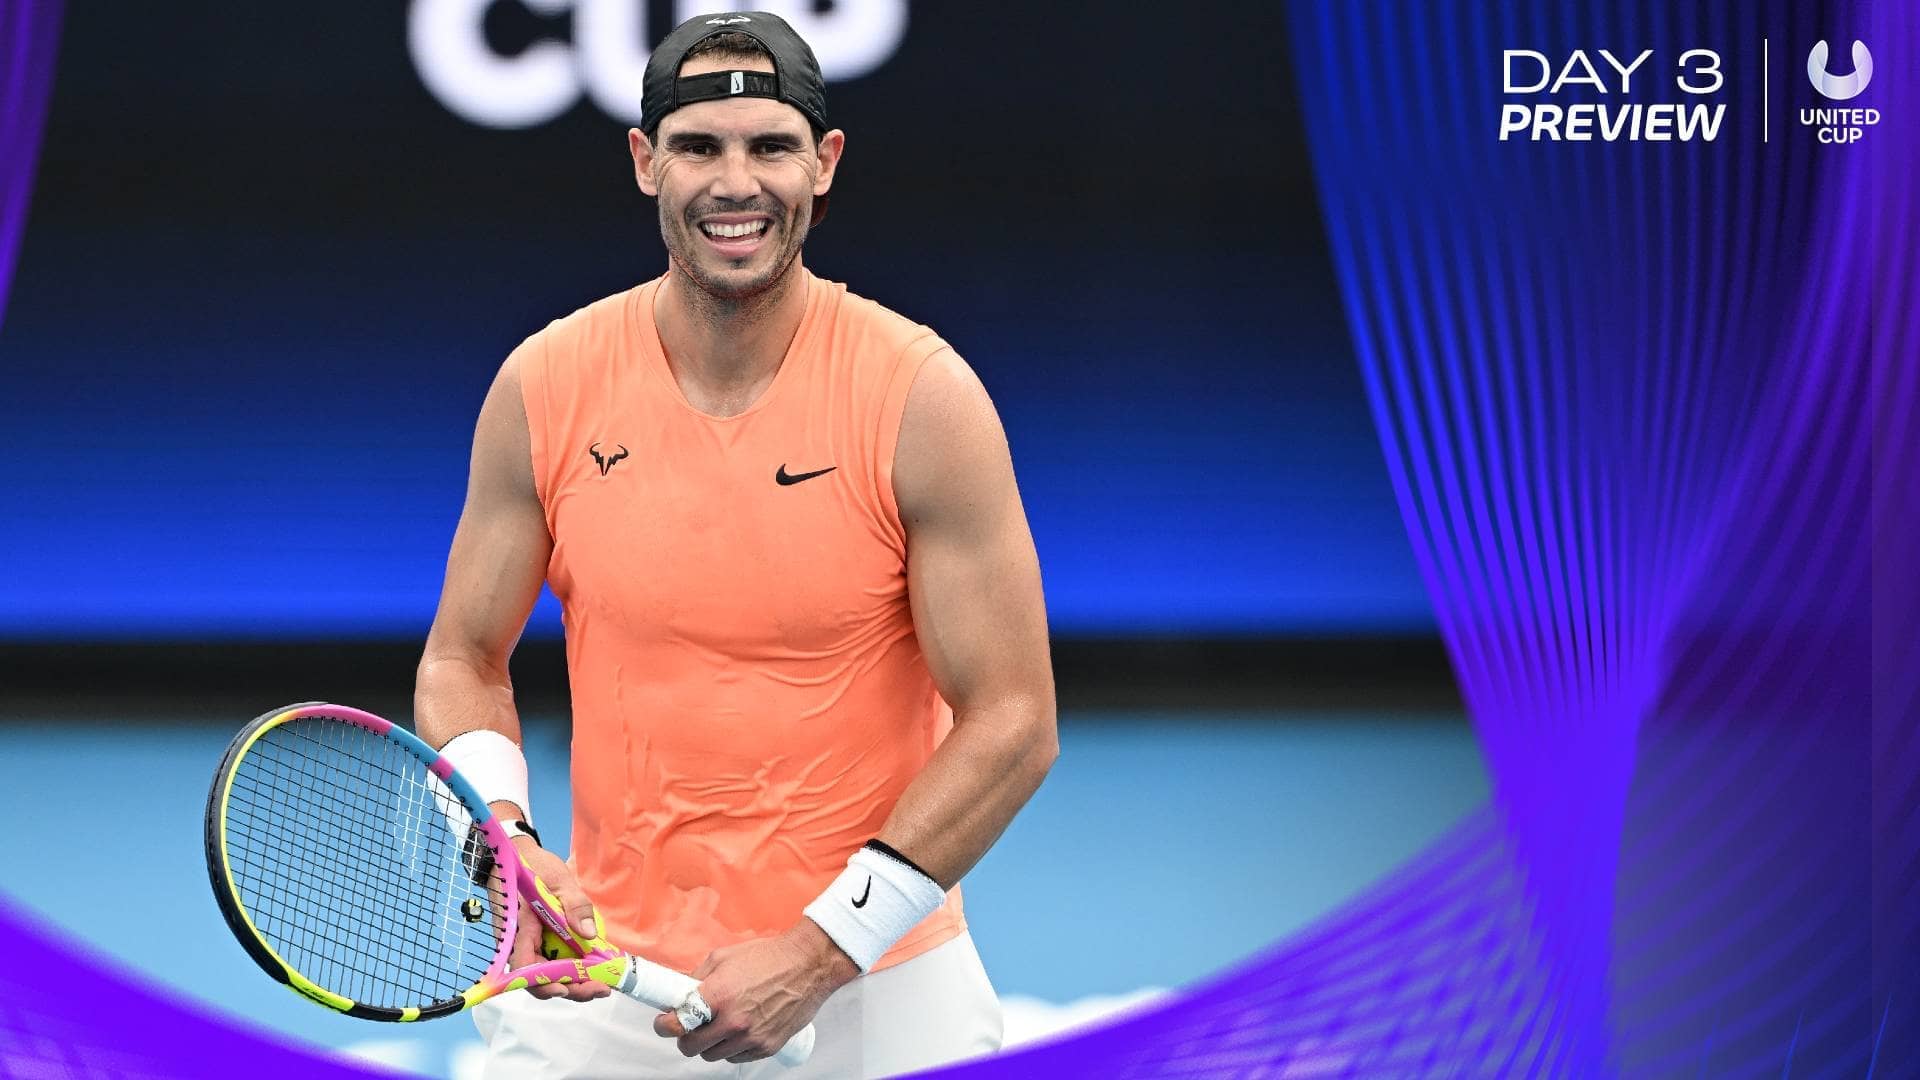 United Cup Day 3 Preview Nadal, Swiatek Open Campaigns United Cup Tennis